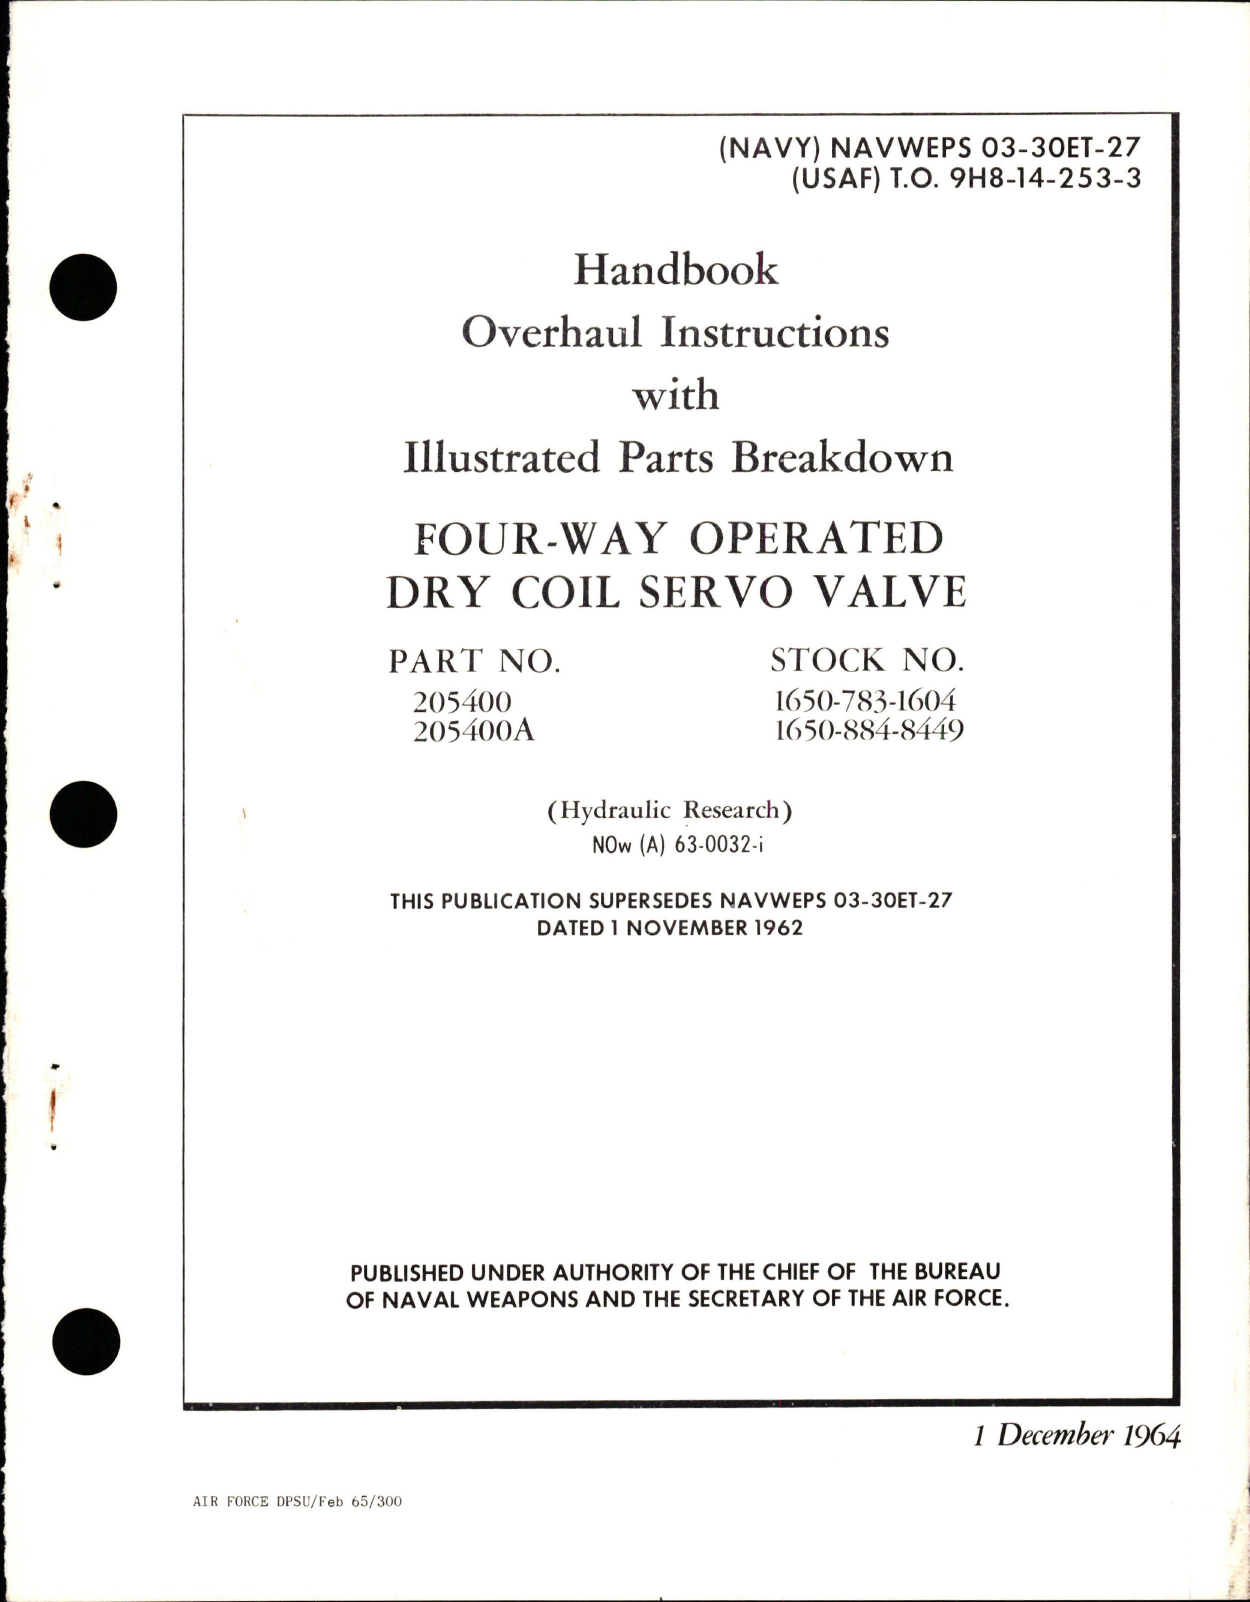 Sample page 1 from AirCorps Library document: Overhaul Instructions with Illustrated Parts for Four-Way Operated Dry Coil Servo Valve - Parts 205400 and 205400A